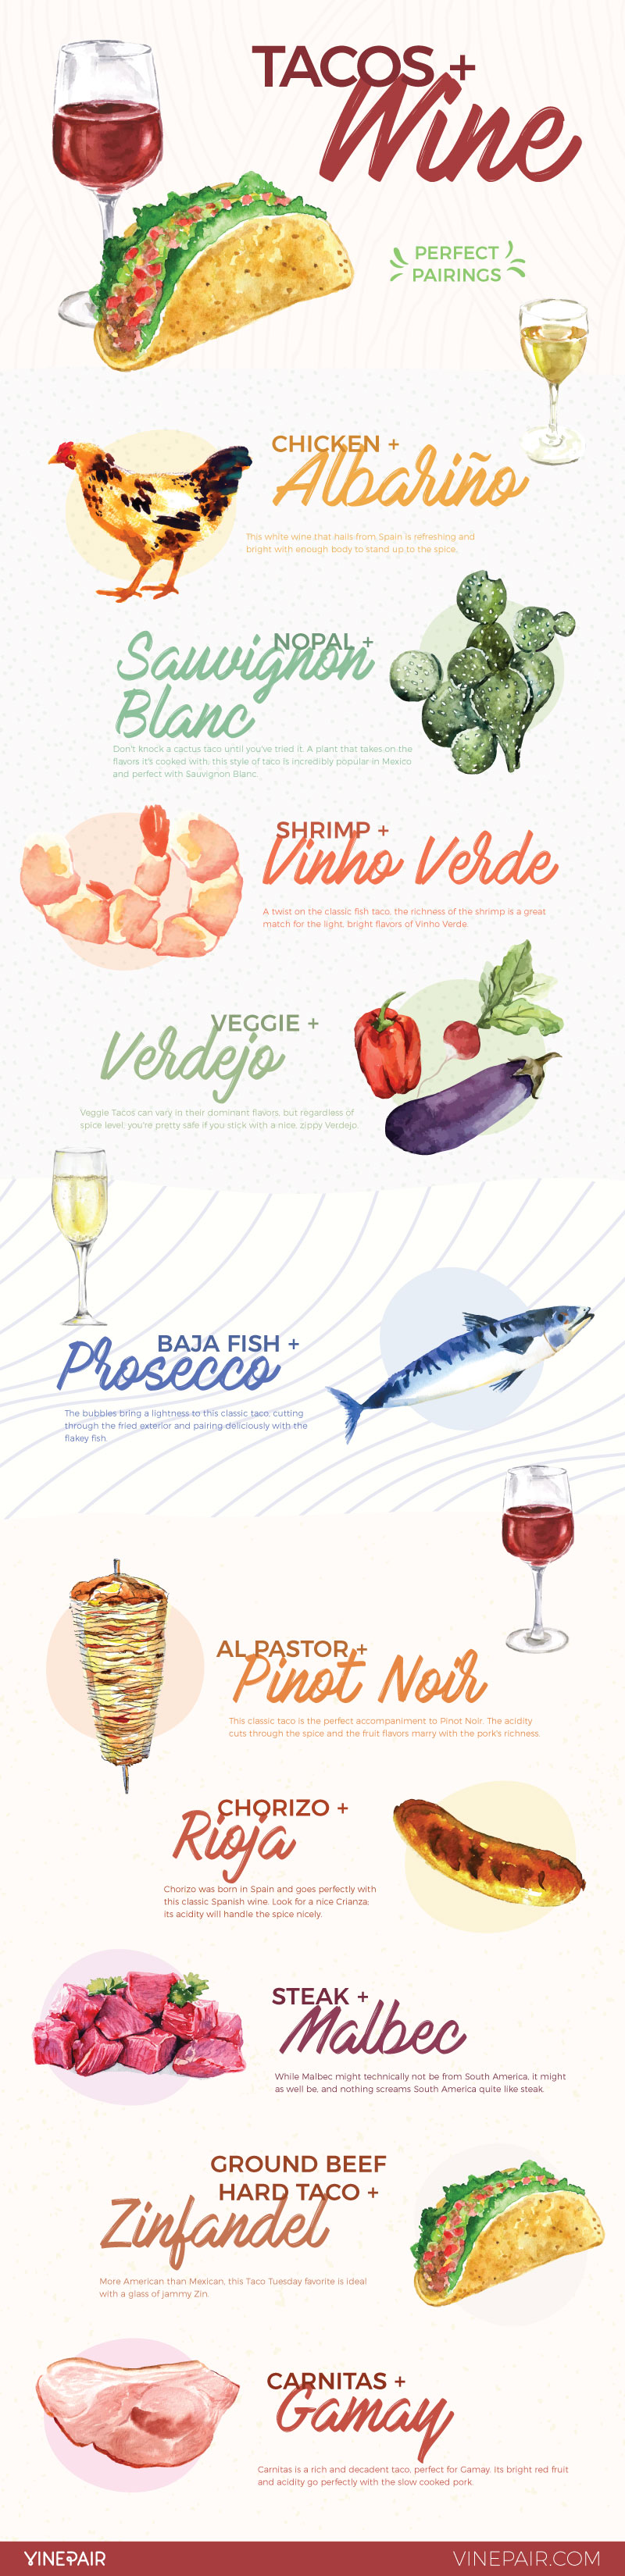 The Perfect Wine Pairing For America's Favorite Tacos [Infographic]